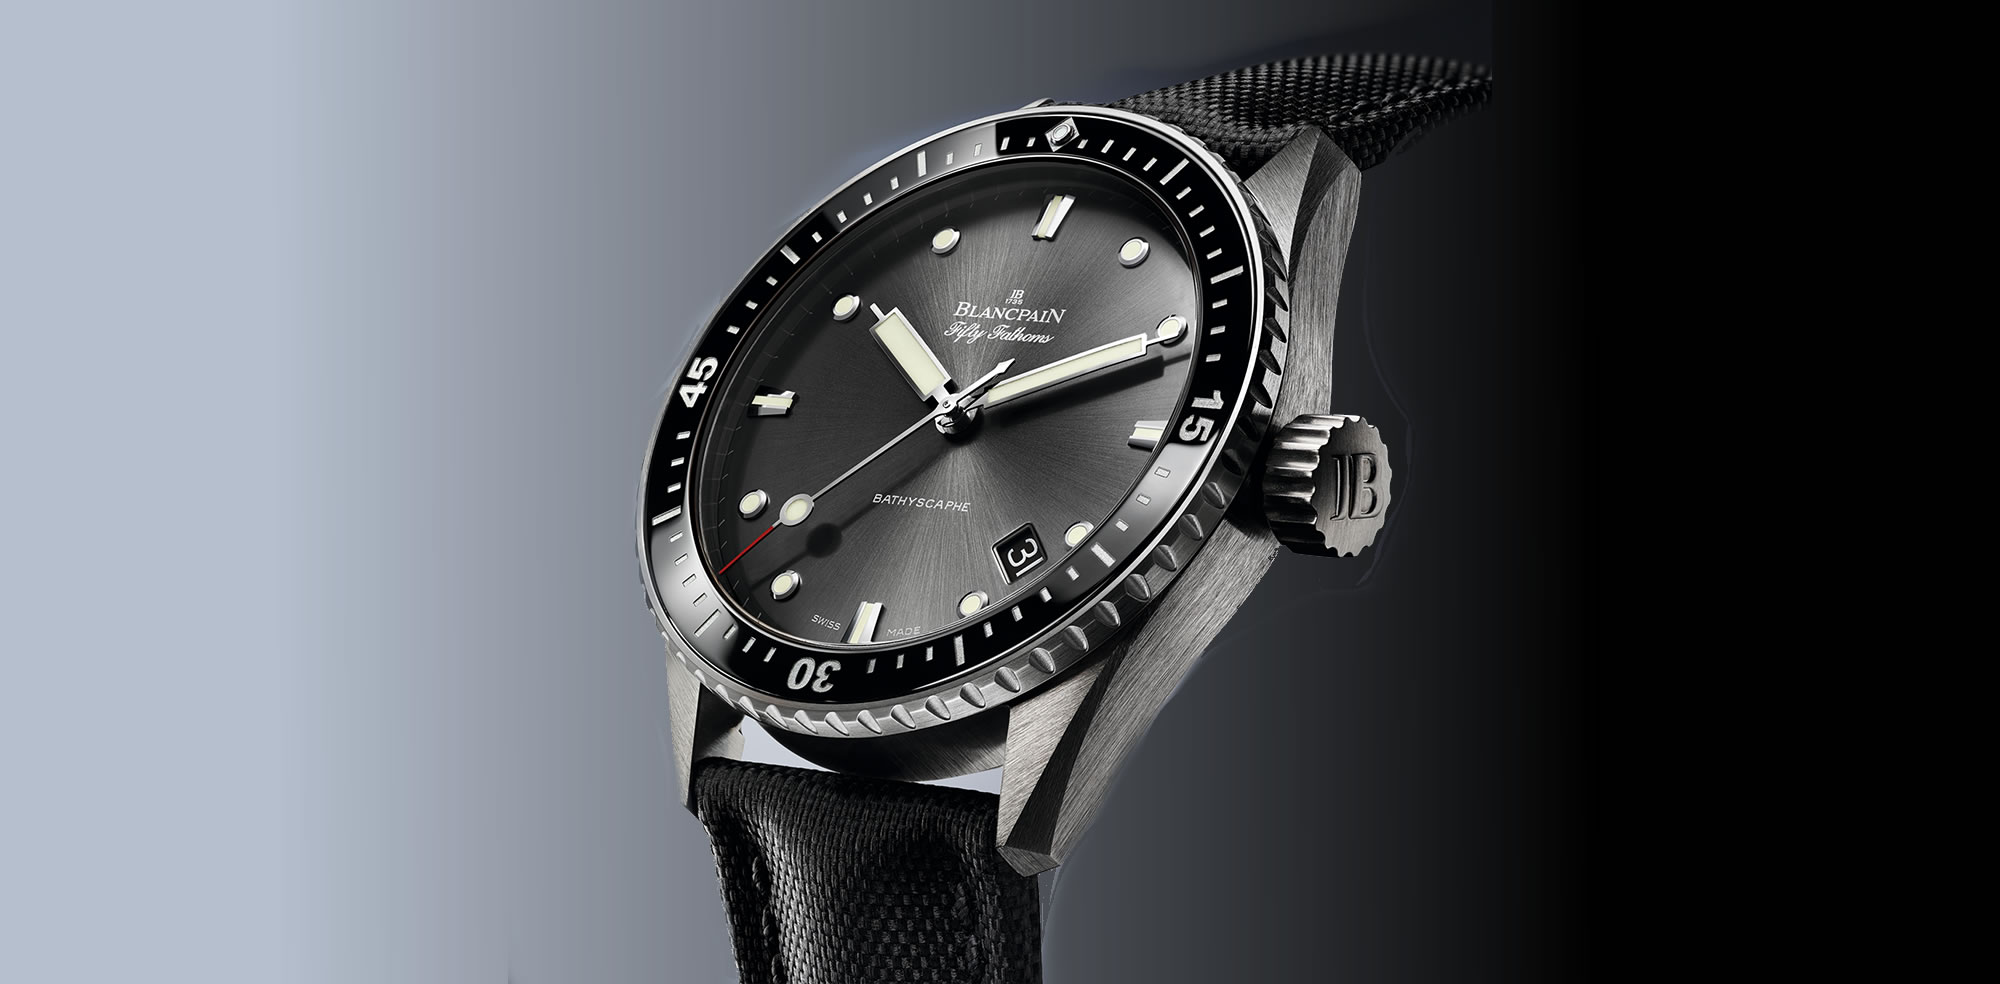 Blancpain Fifty Fathoms Bathscaphe Meteor Grey Diver’s Watch Review